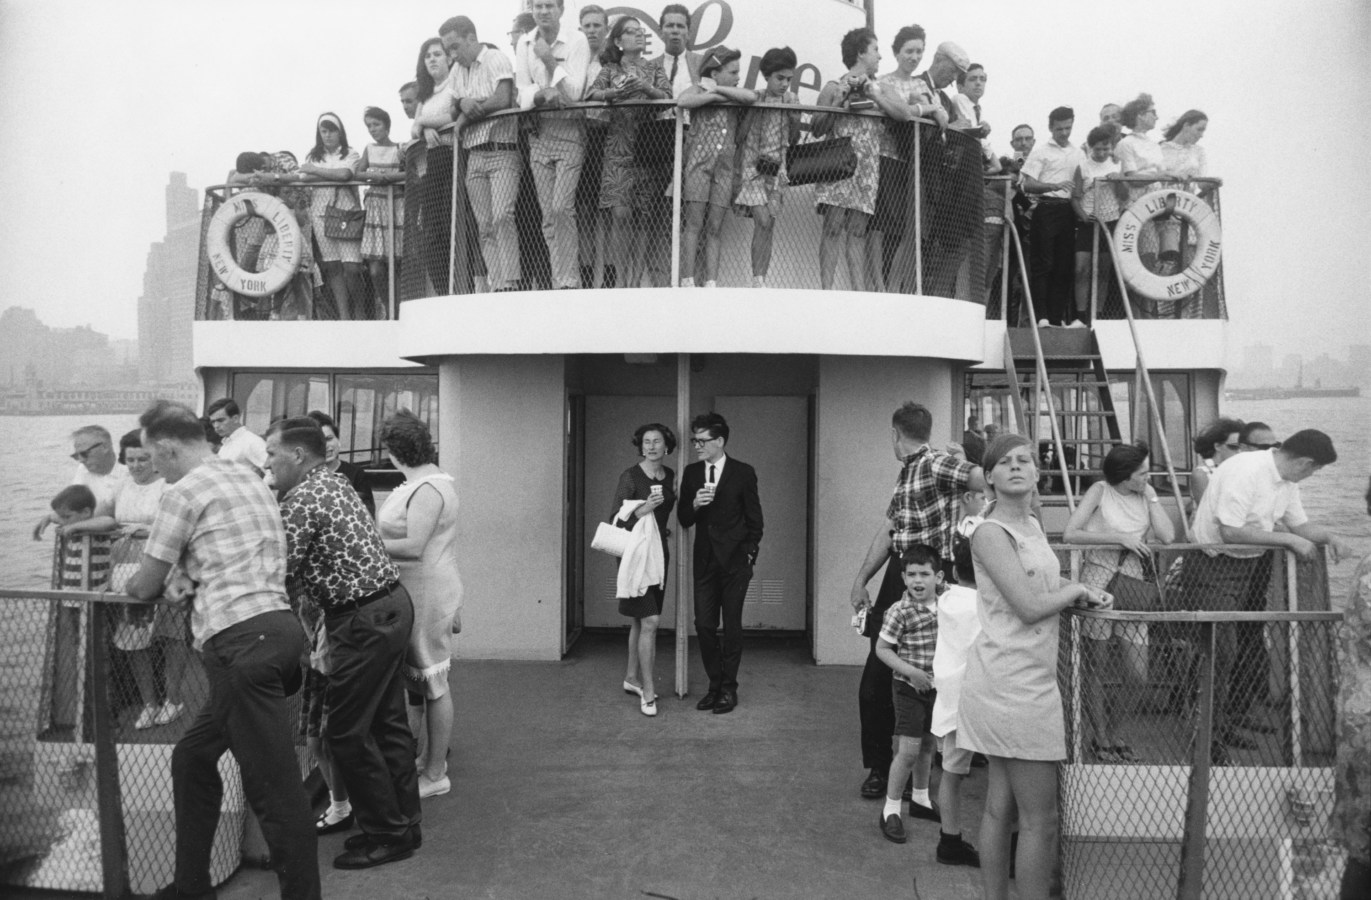 Black-and-white photograph of a young man and woman at the front of a two-story ferry filled with people looking out over the railings